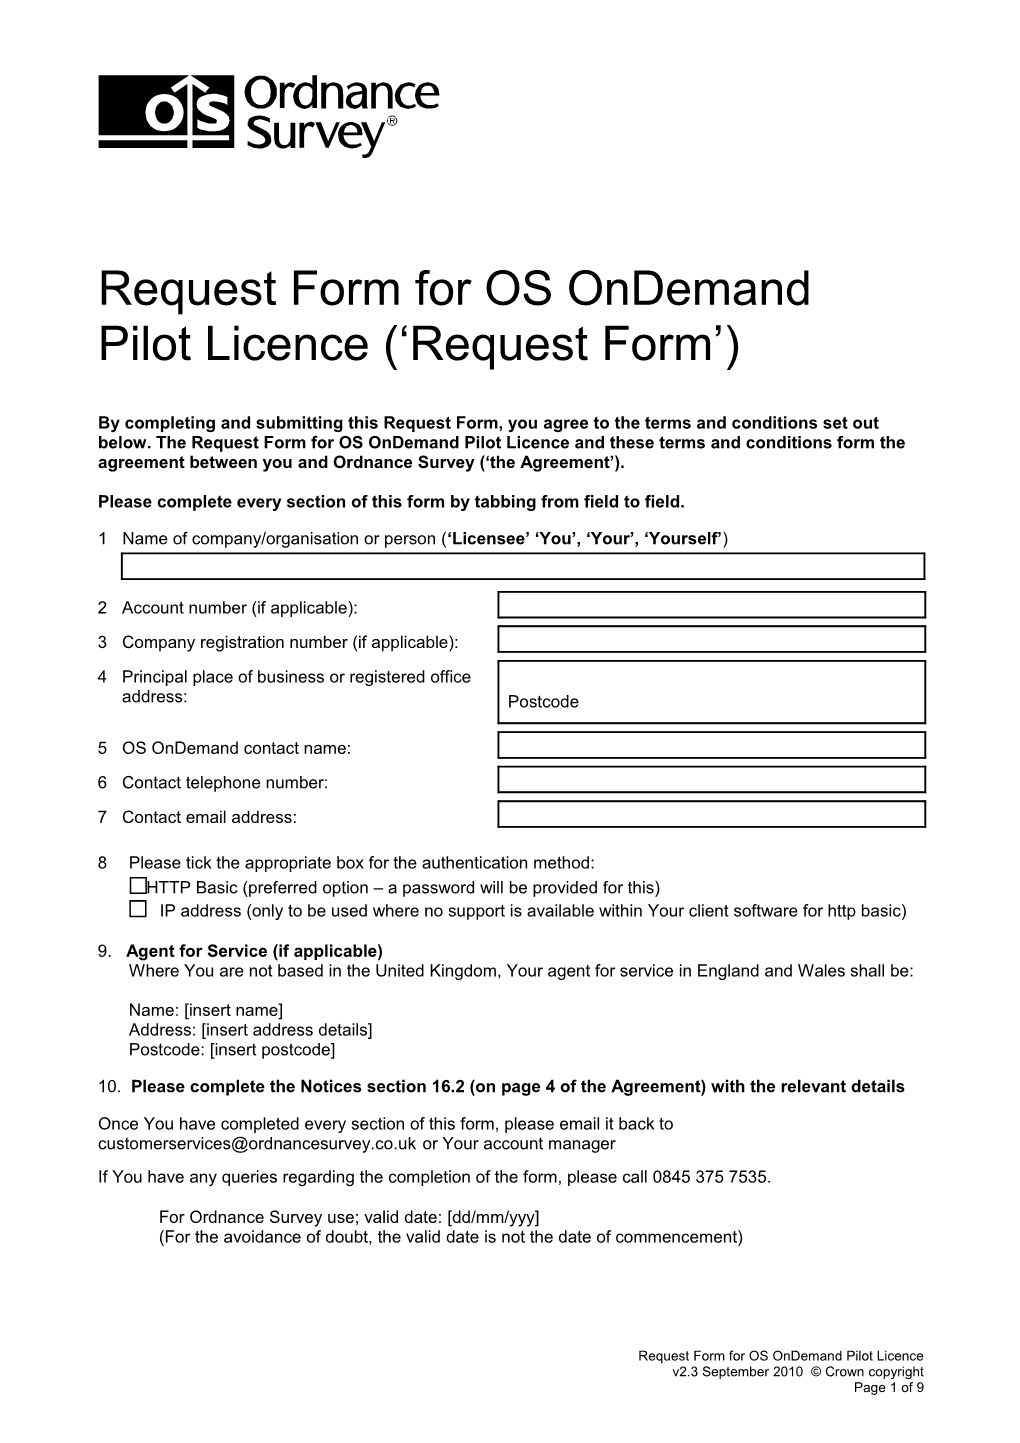 Request Form for OS Ondemand Pilot Licence